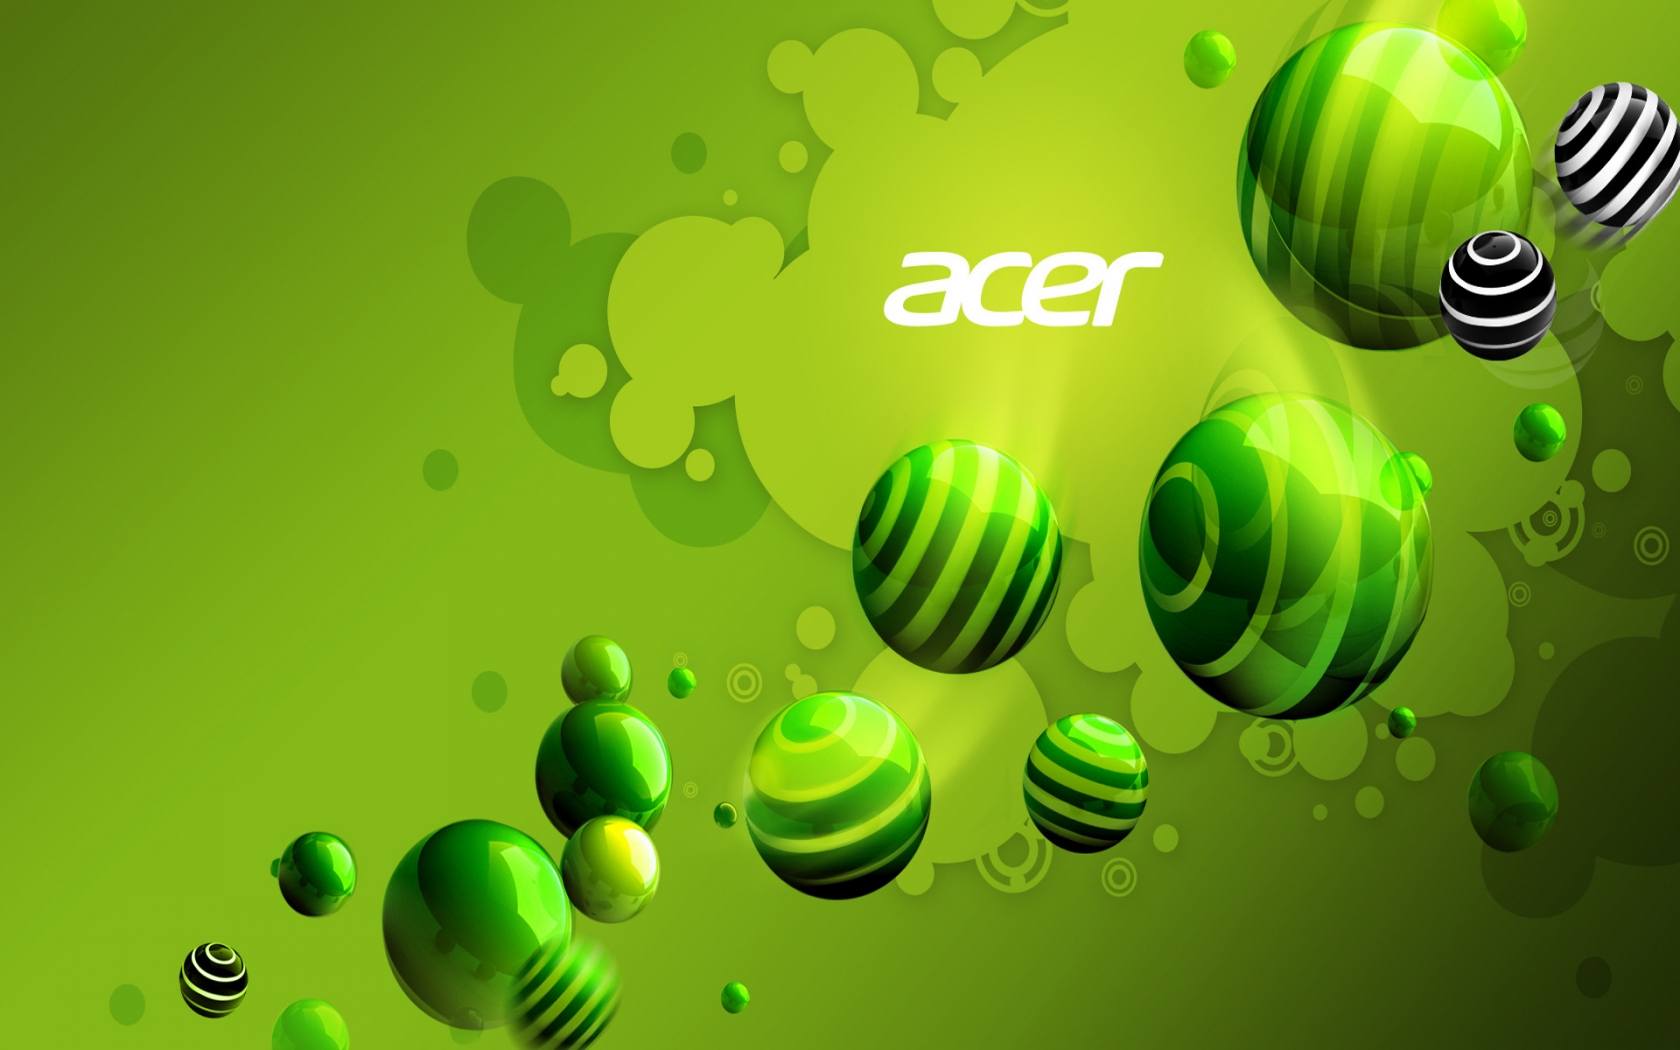 Acer Green World for 1680 x 1050 widescreen resolution